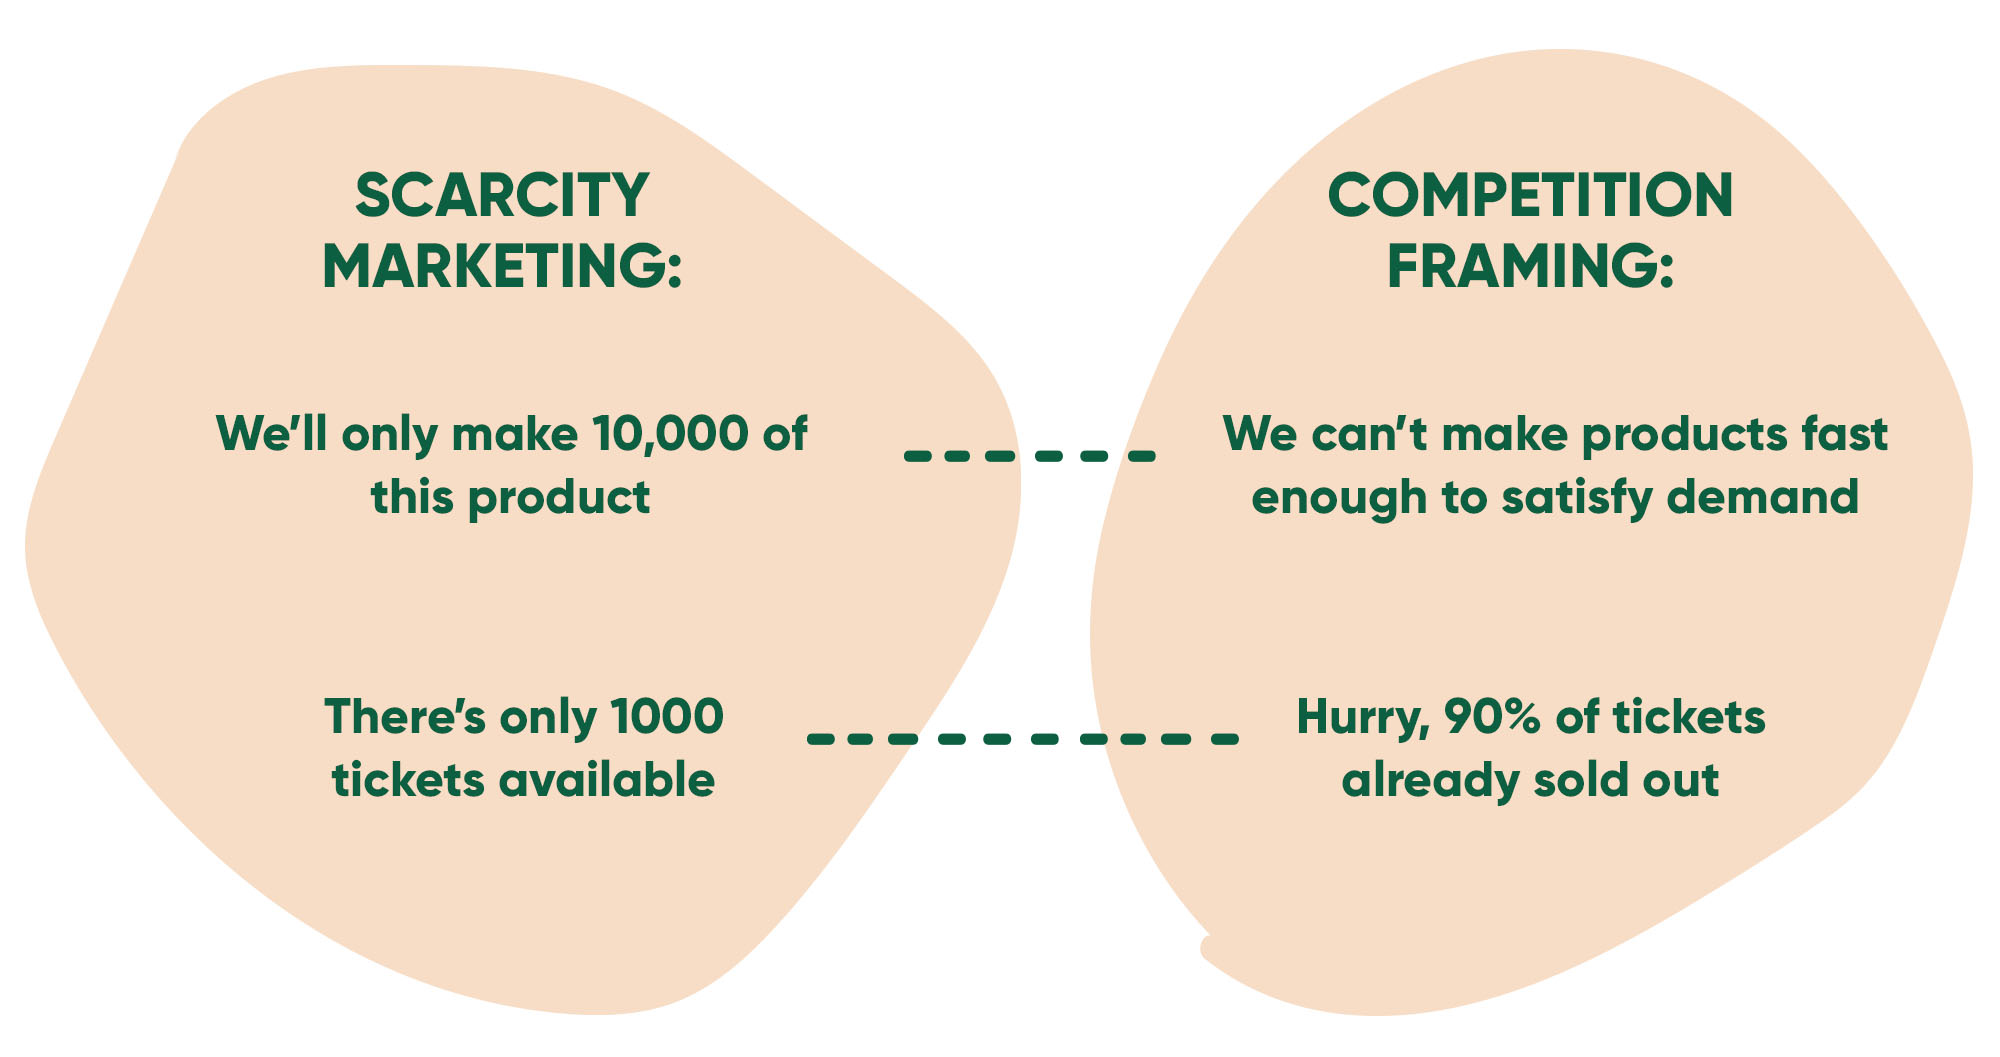 Difference between scarcity marketing and scarcity marketing with competition framing